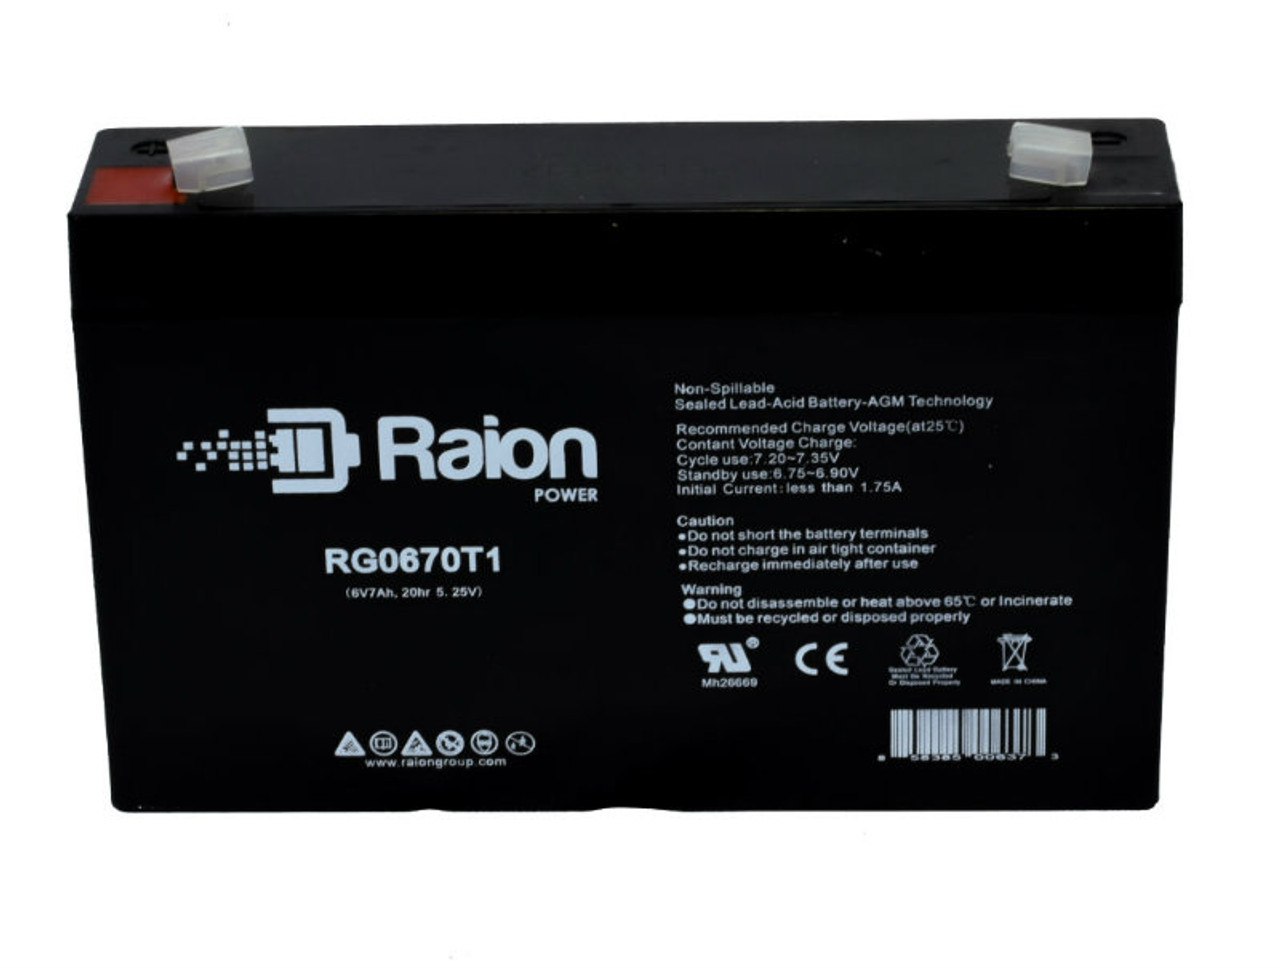 Raion Power RG0670T1 Replacement Battery Cartridge for Light Alarms LL6